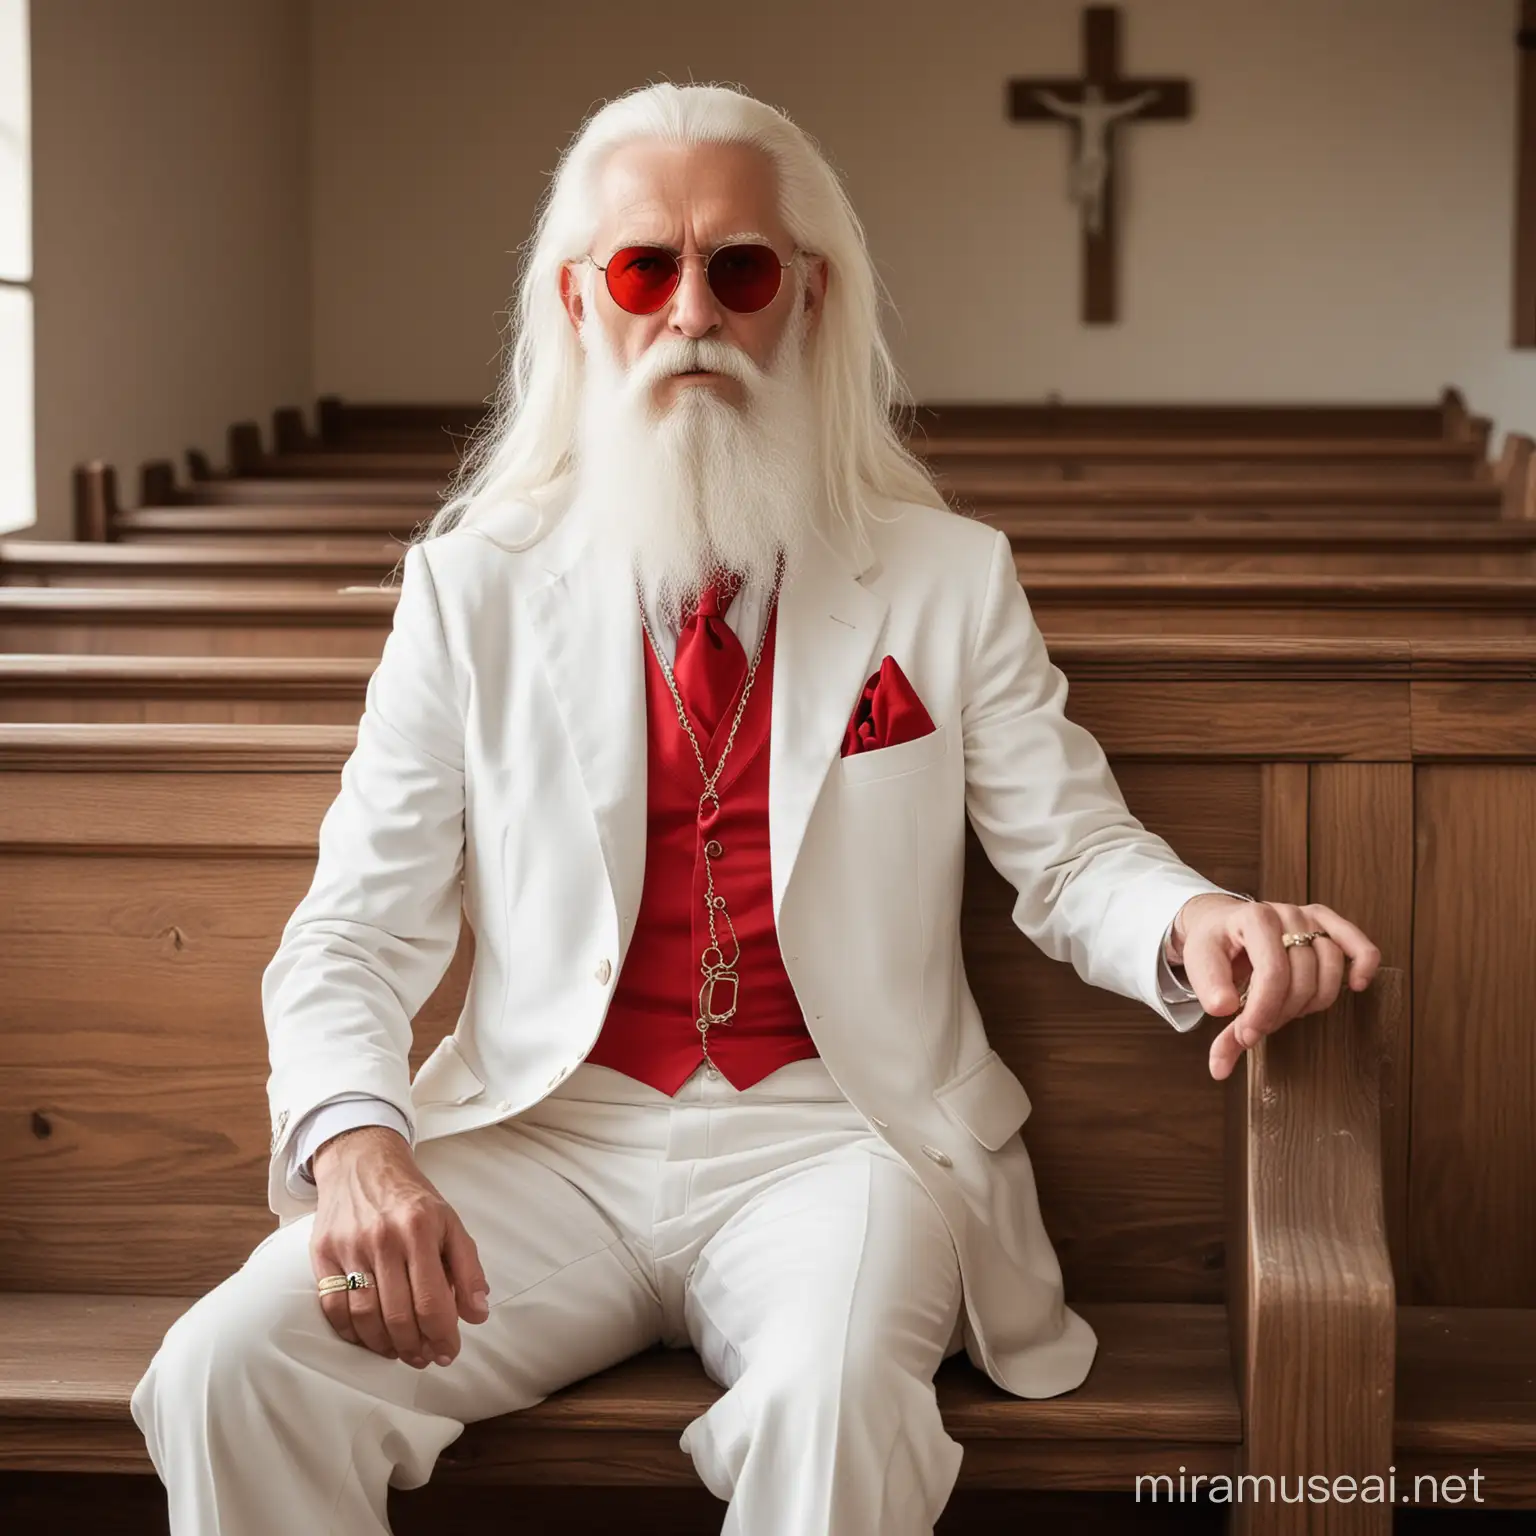 Tall skinny white con man with long white beard and hair, round red sunglasses, white old west preacher's suit sitting handcuffed on a church pew drunk.
